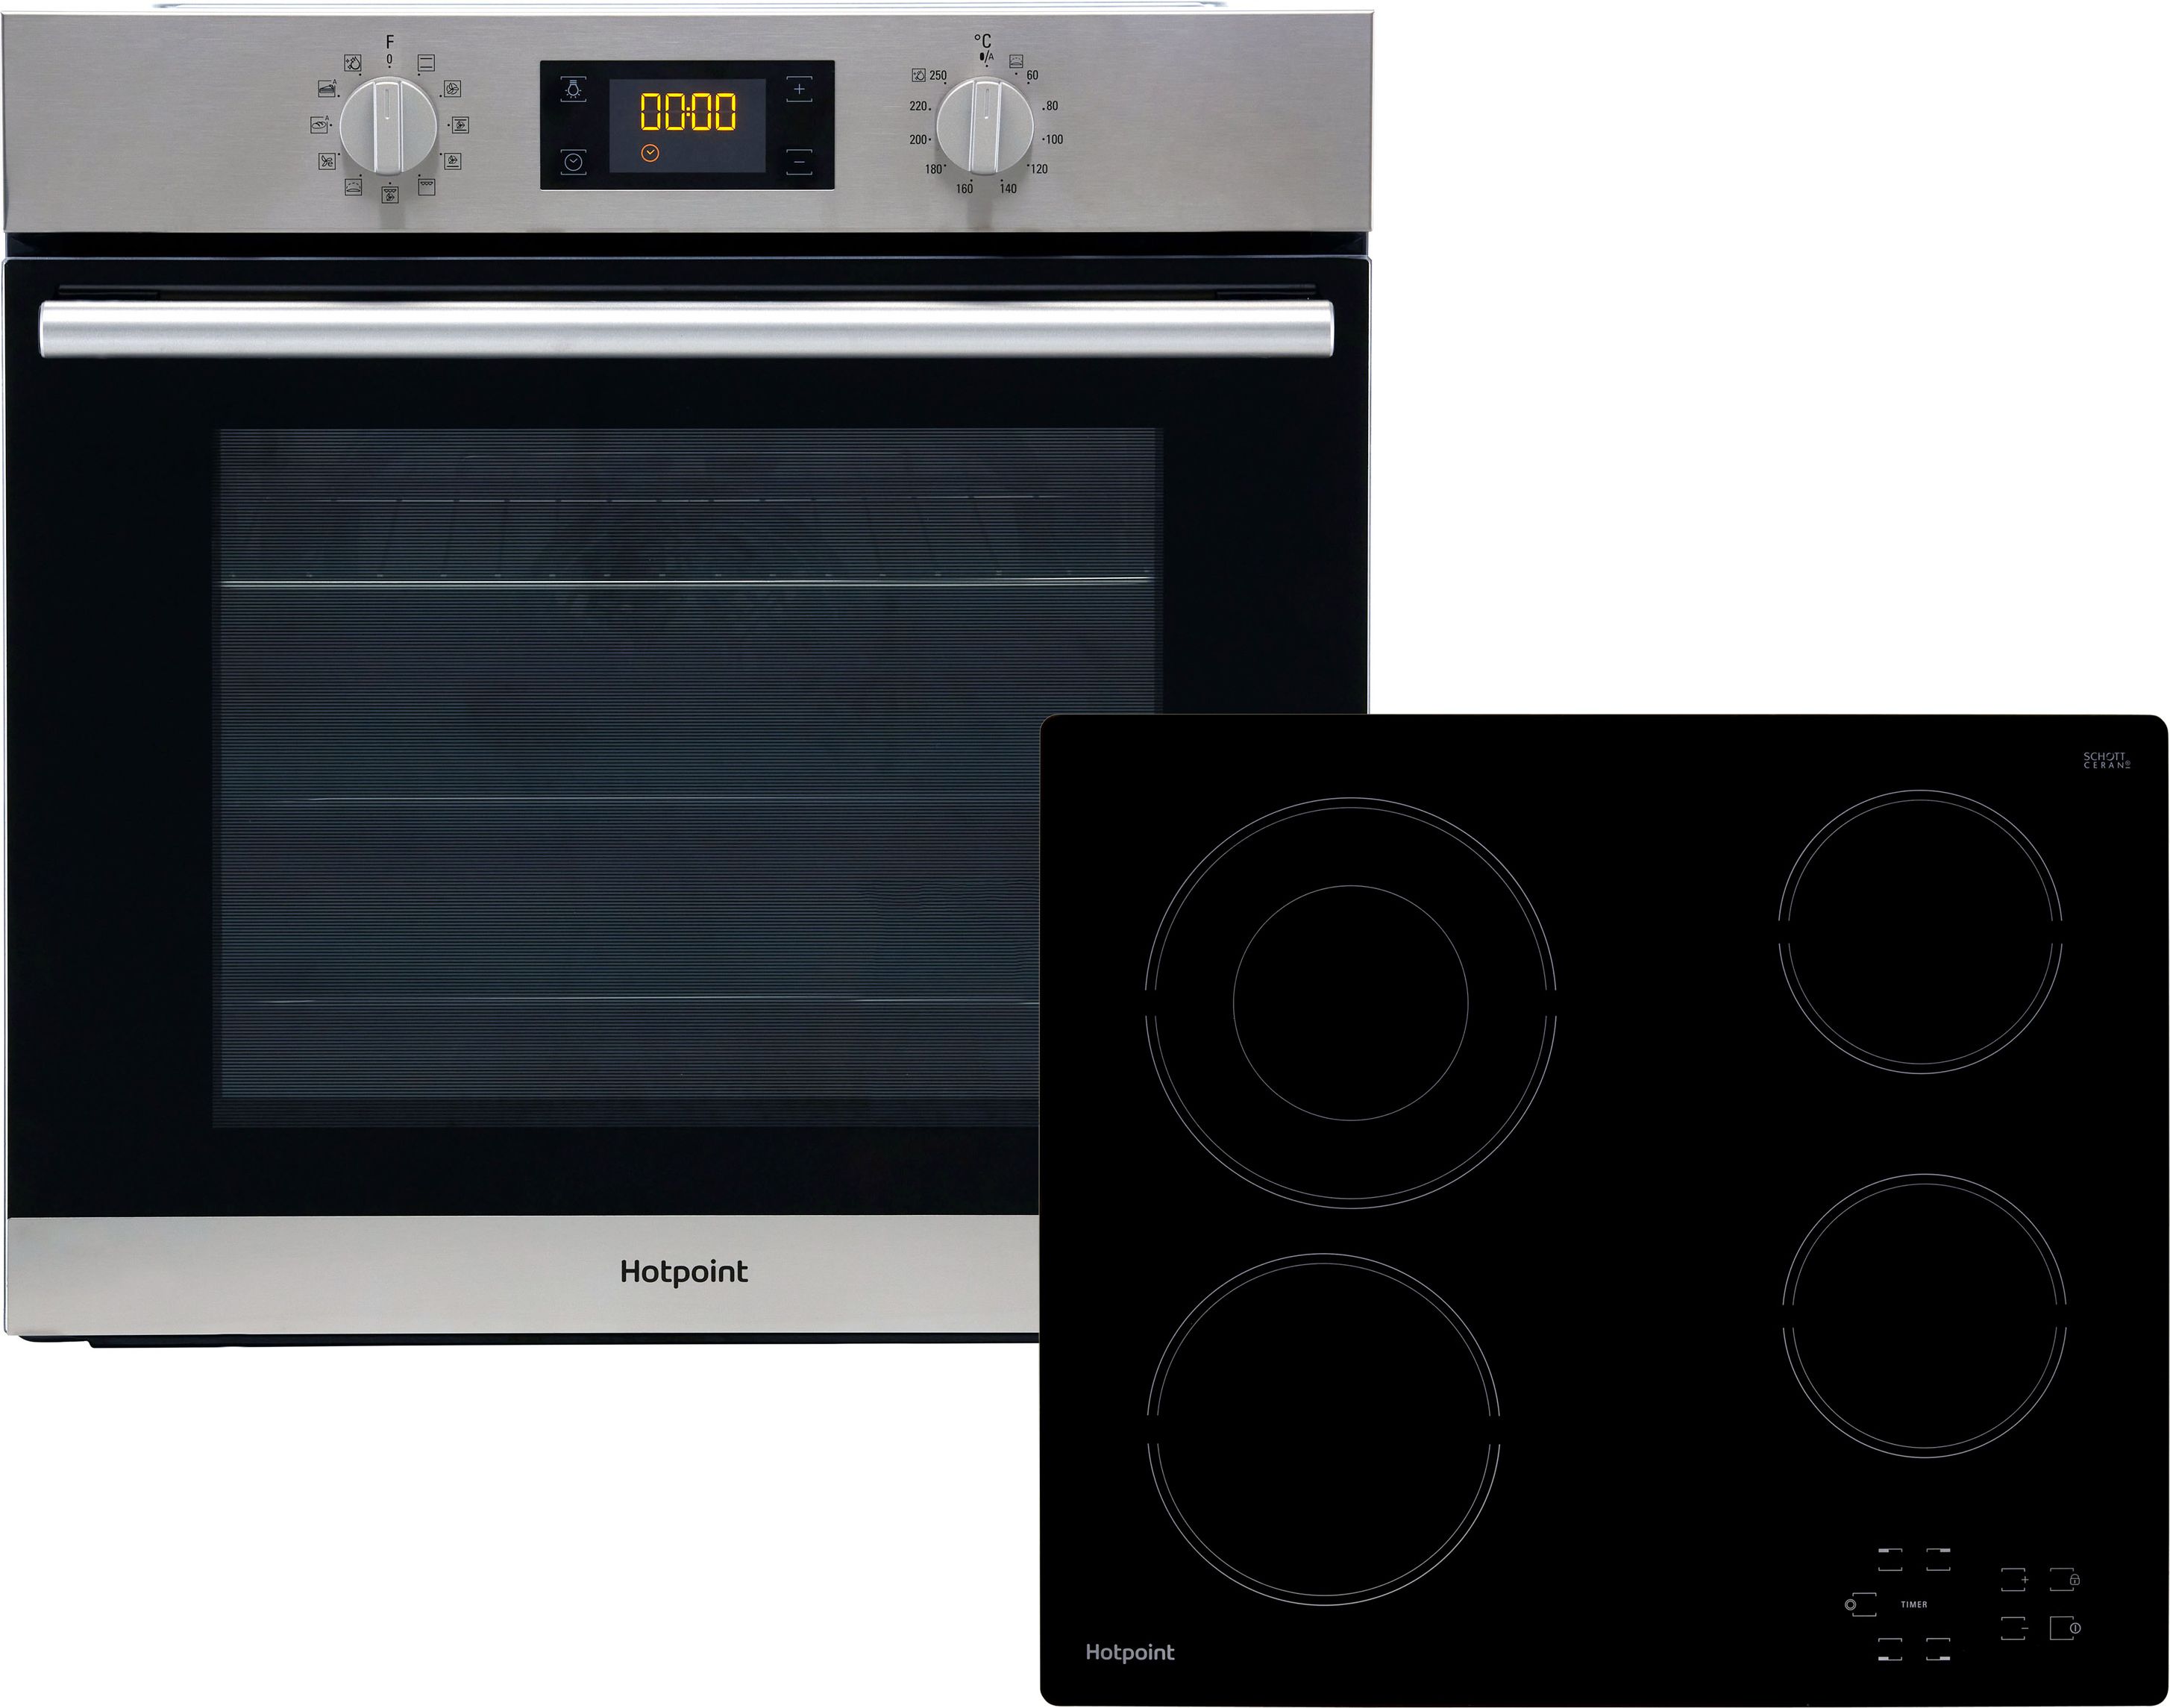 Hotpoint HotSA2Ceram Built In Electric Single Oven and Ceramic Hob Pack - Stainless Steel / Black - A+ Rated, Stainless Steel